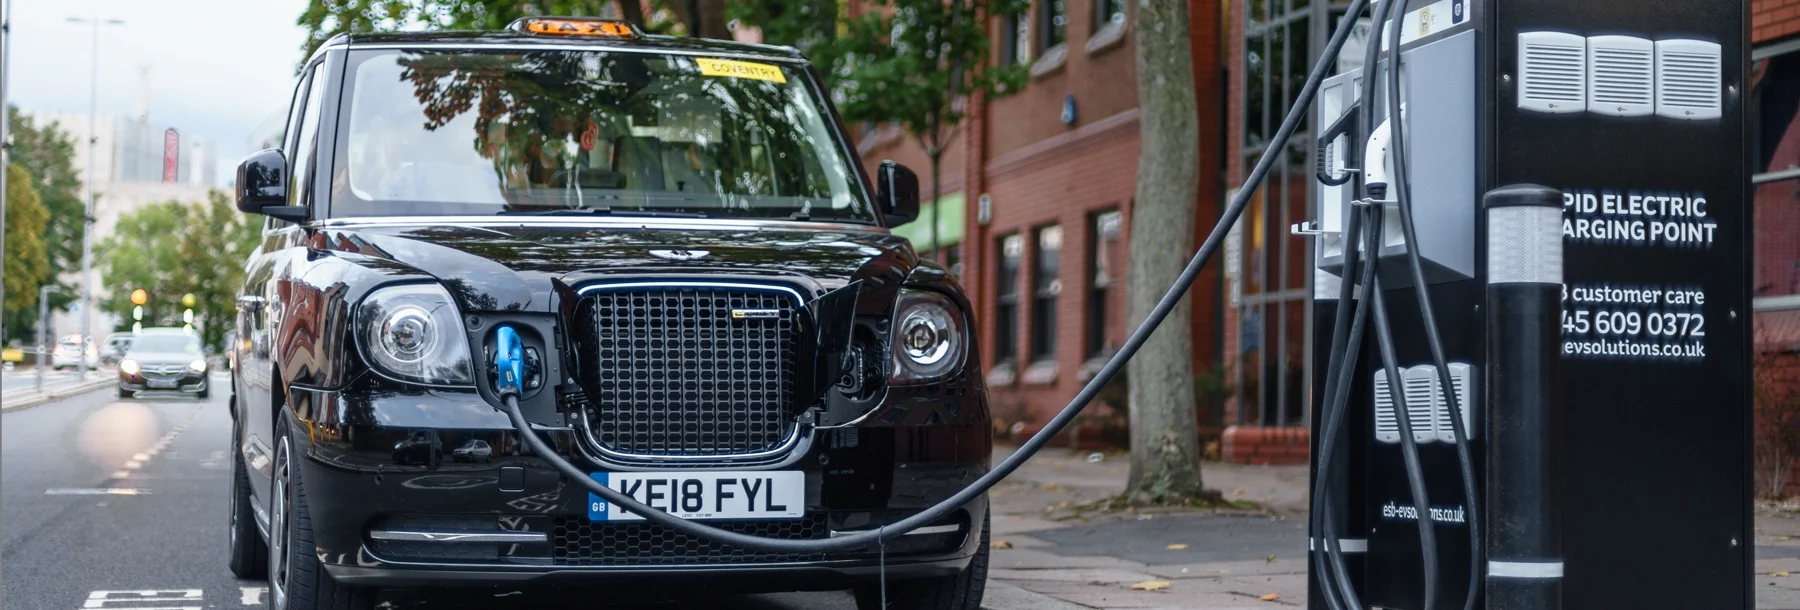 Black cab next to charging station in London